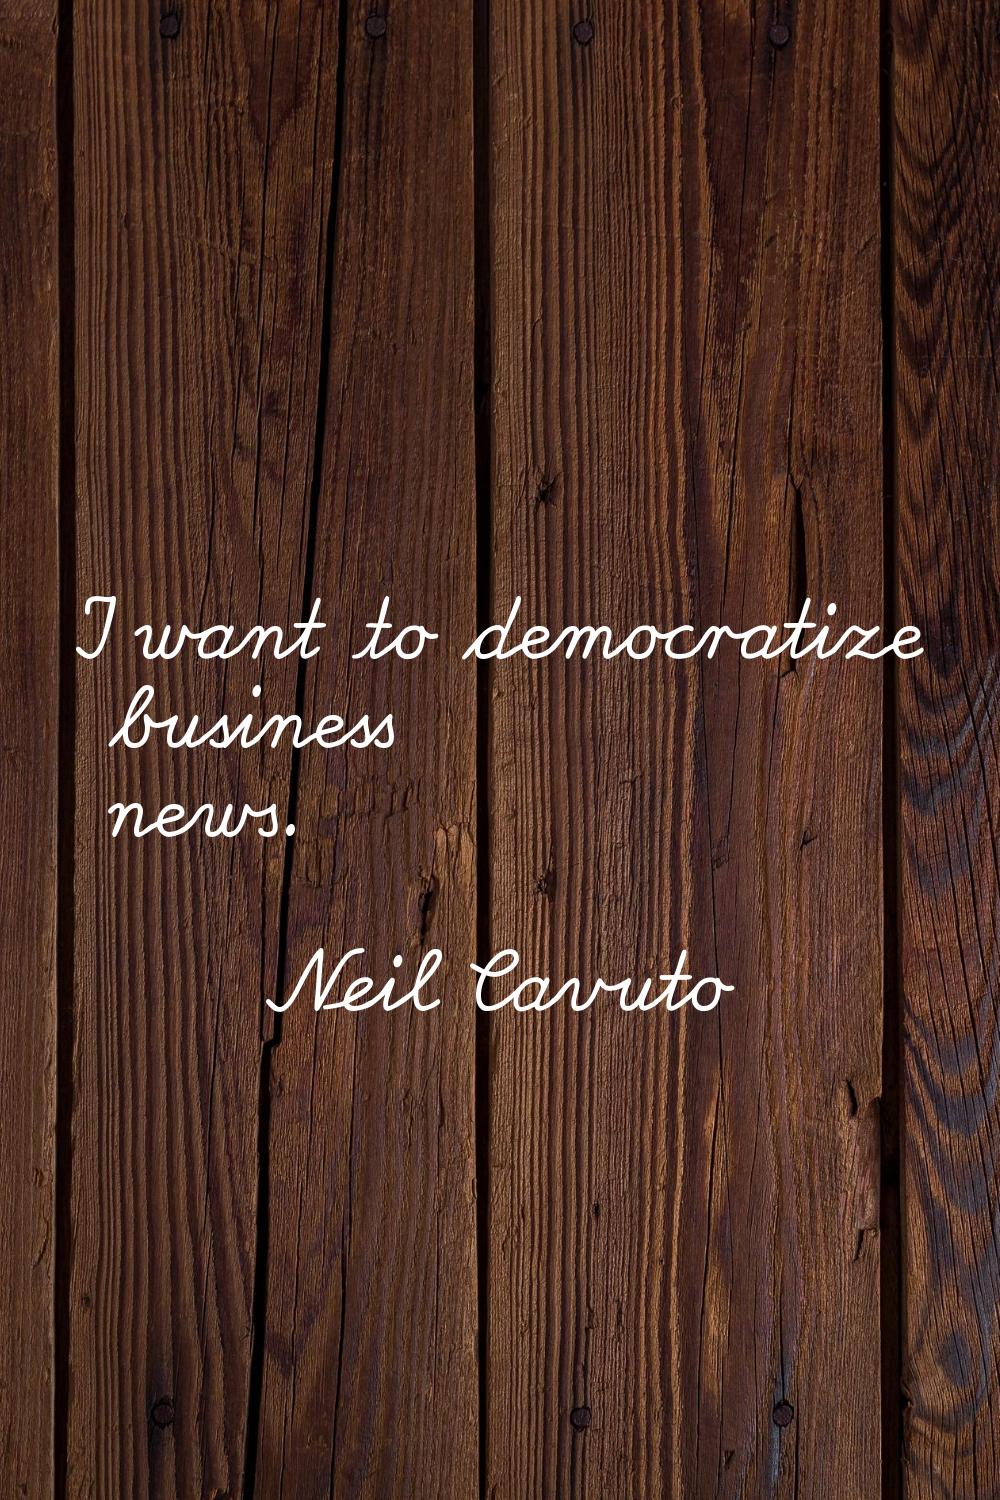 I want to democratize business news.